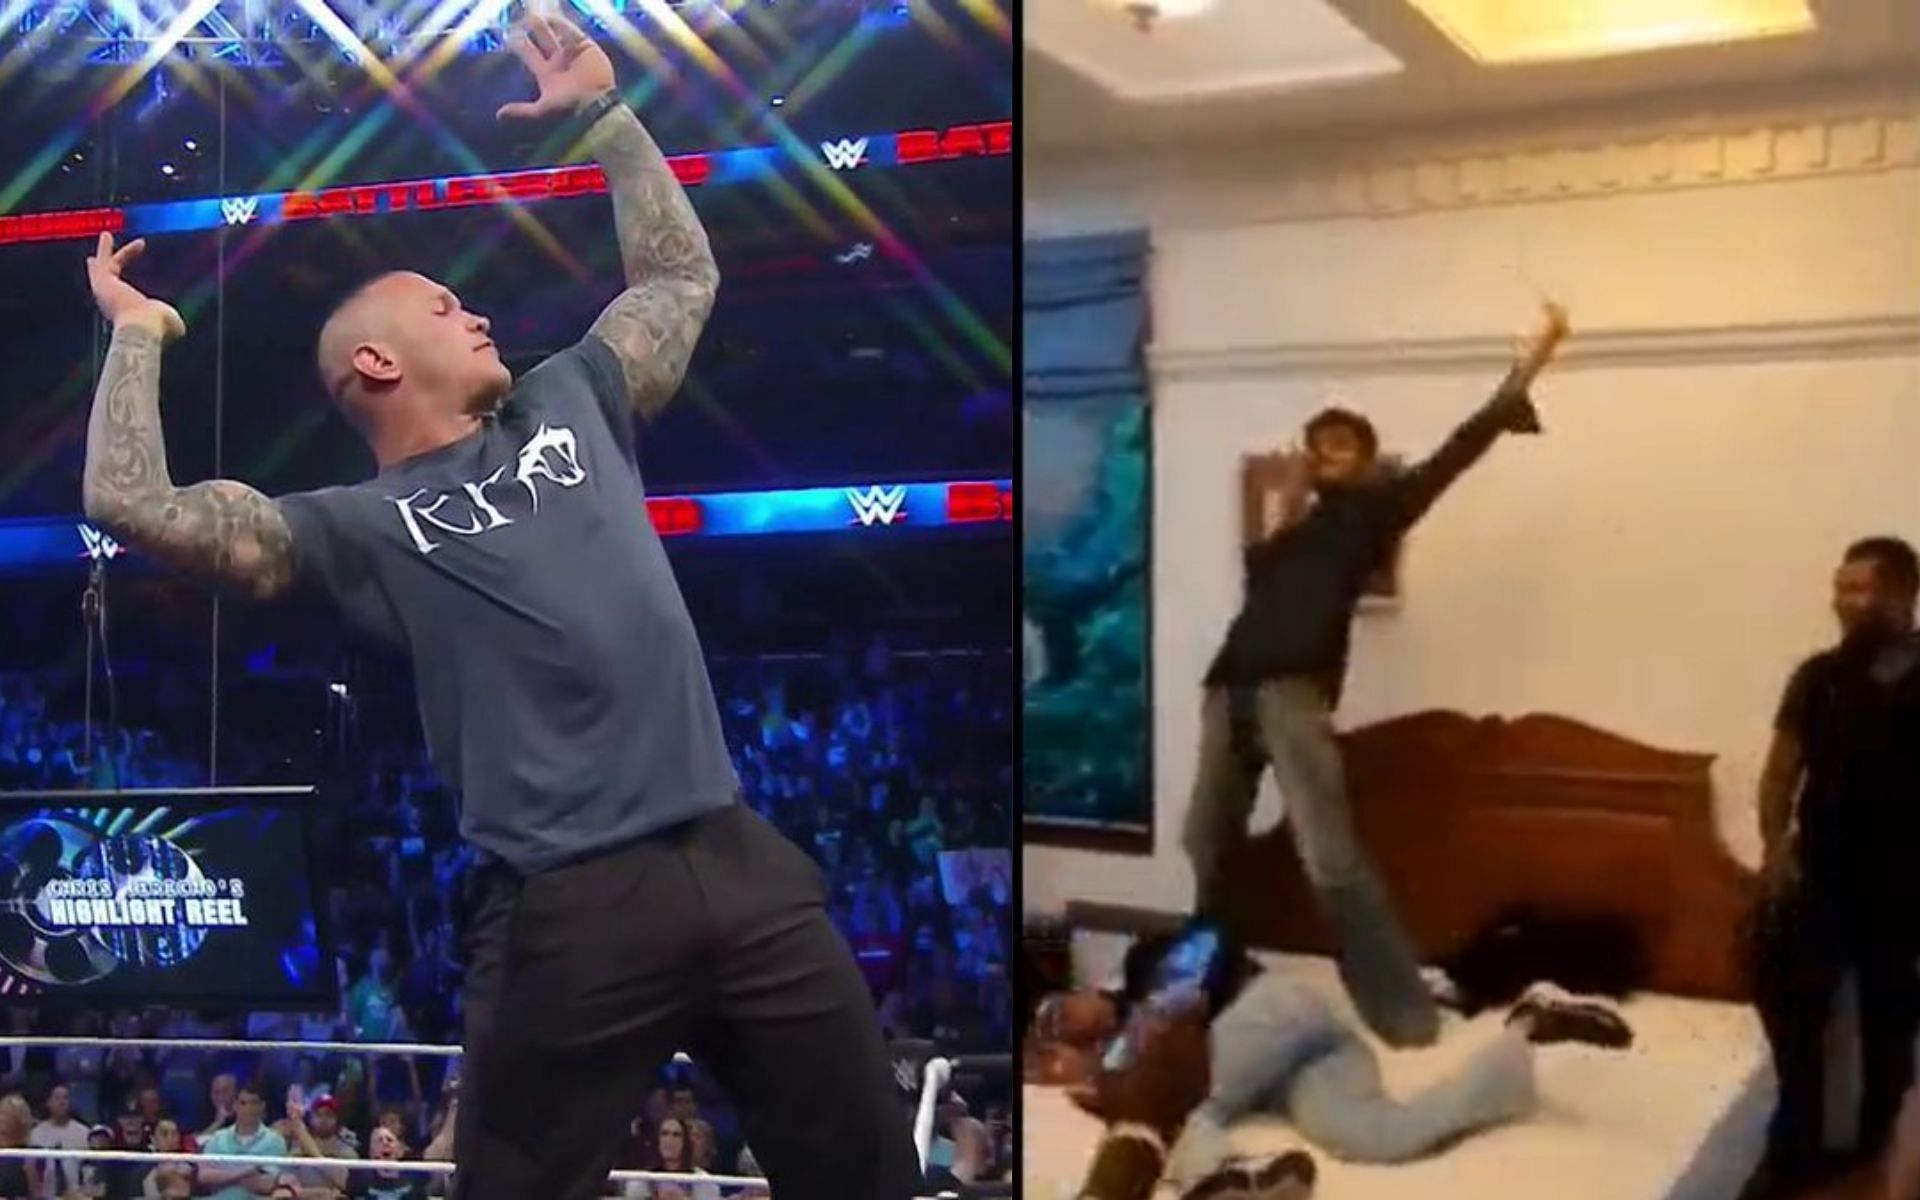 Randy Orton and WWE&#039;s popularity seems to be all-encompassing